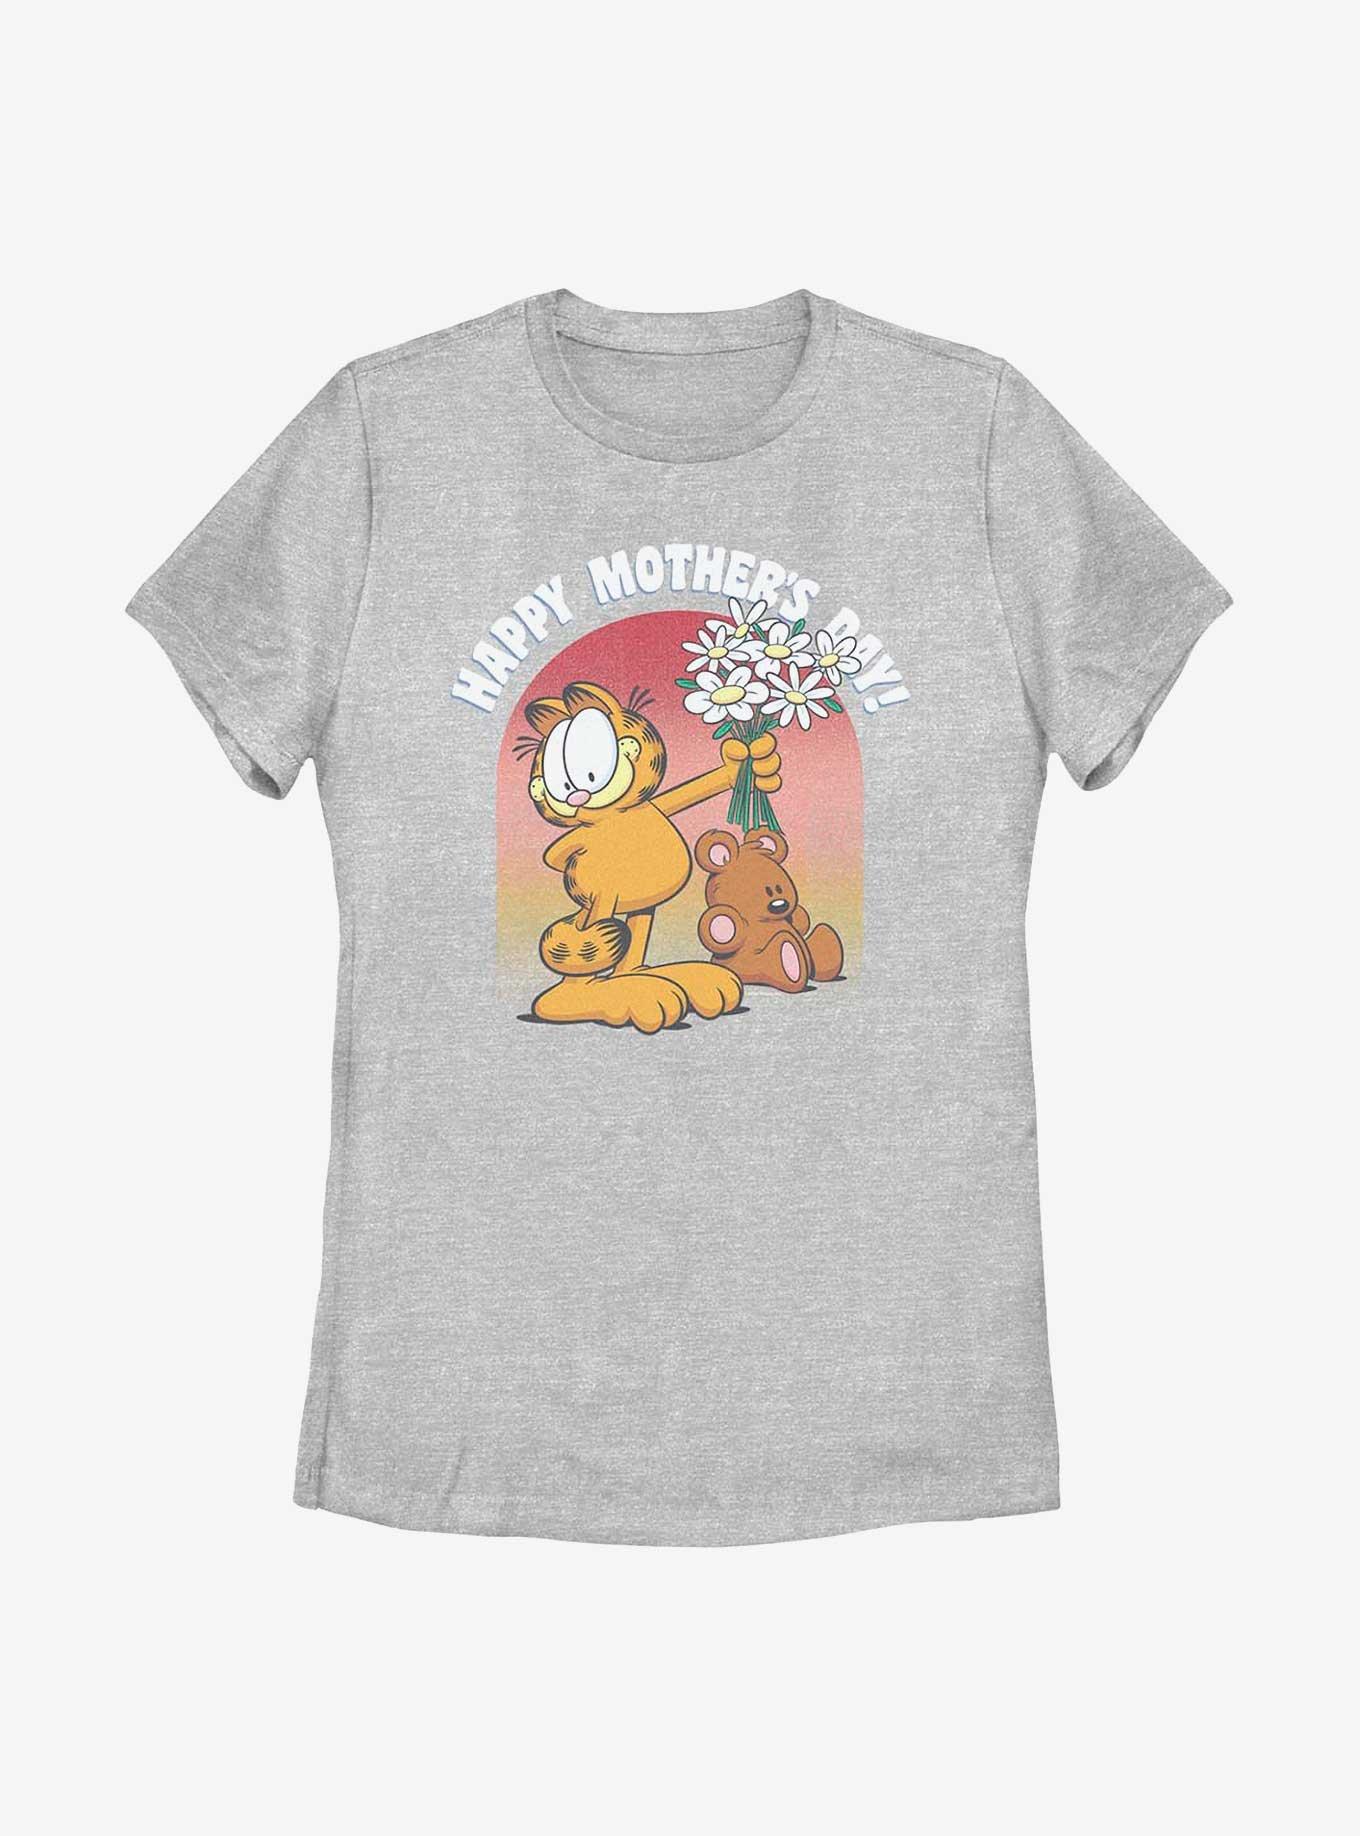 Garfield Mom's Day Women's T-Shirt, ATH HTR, hi-res